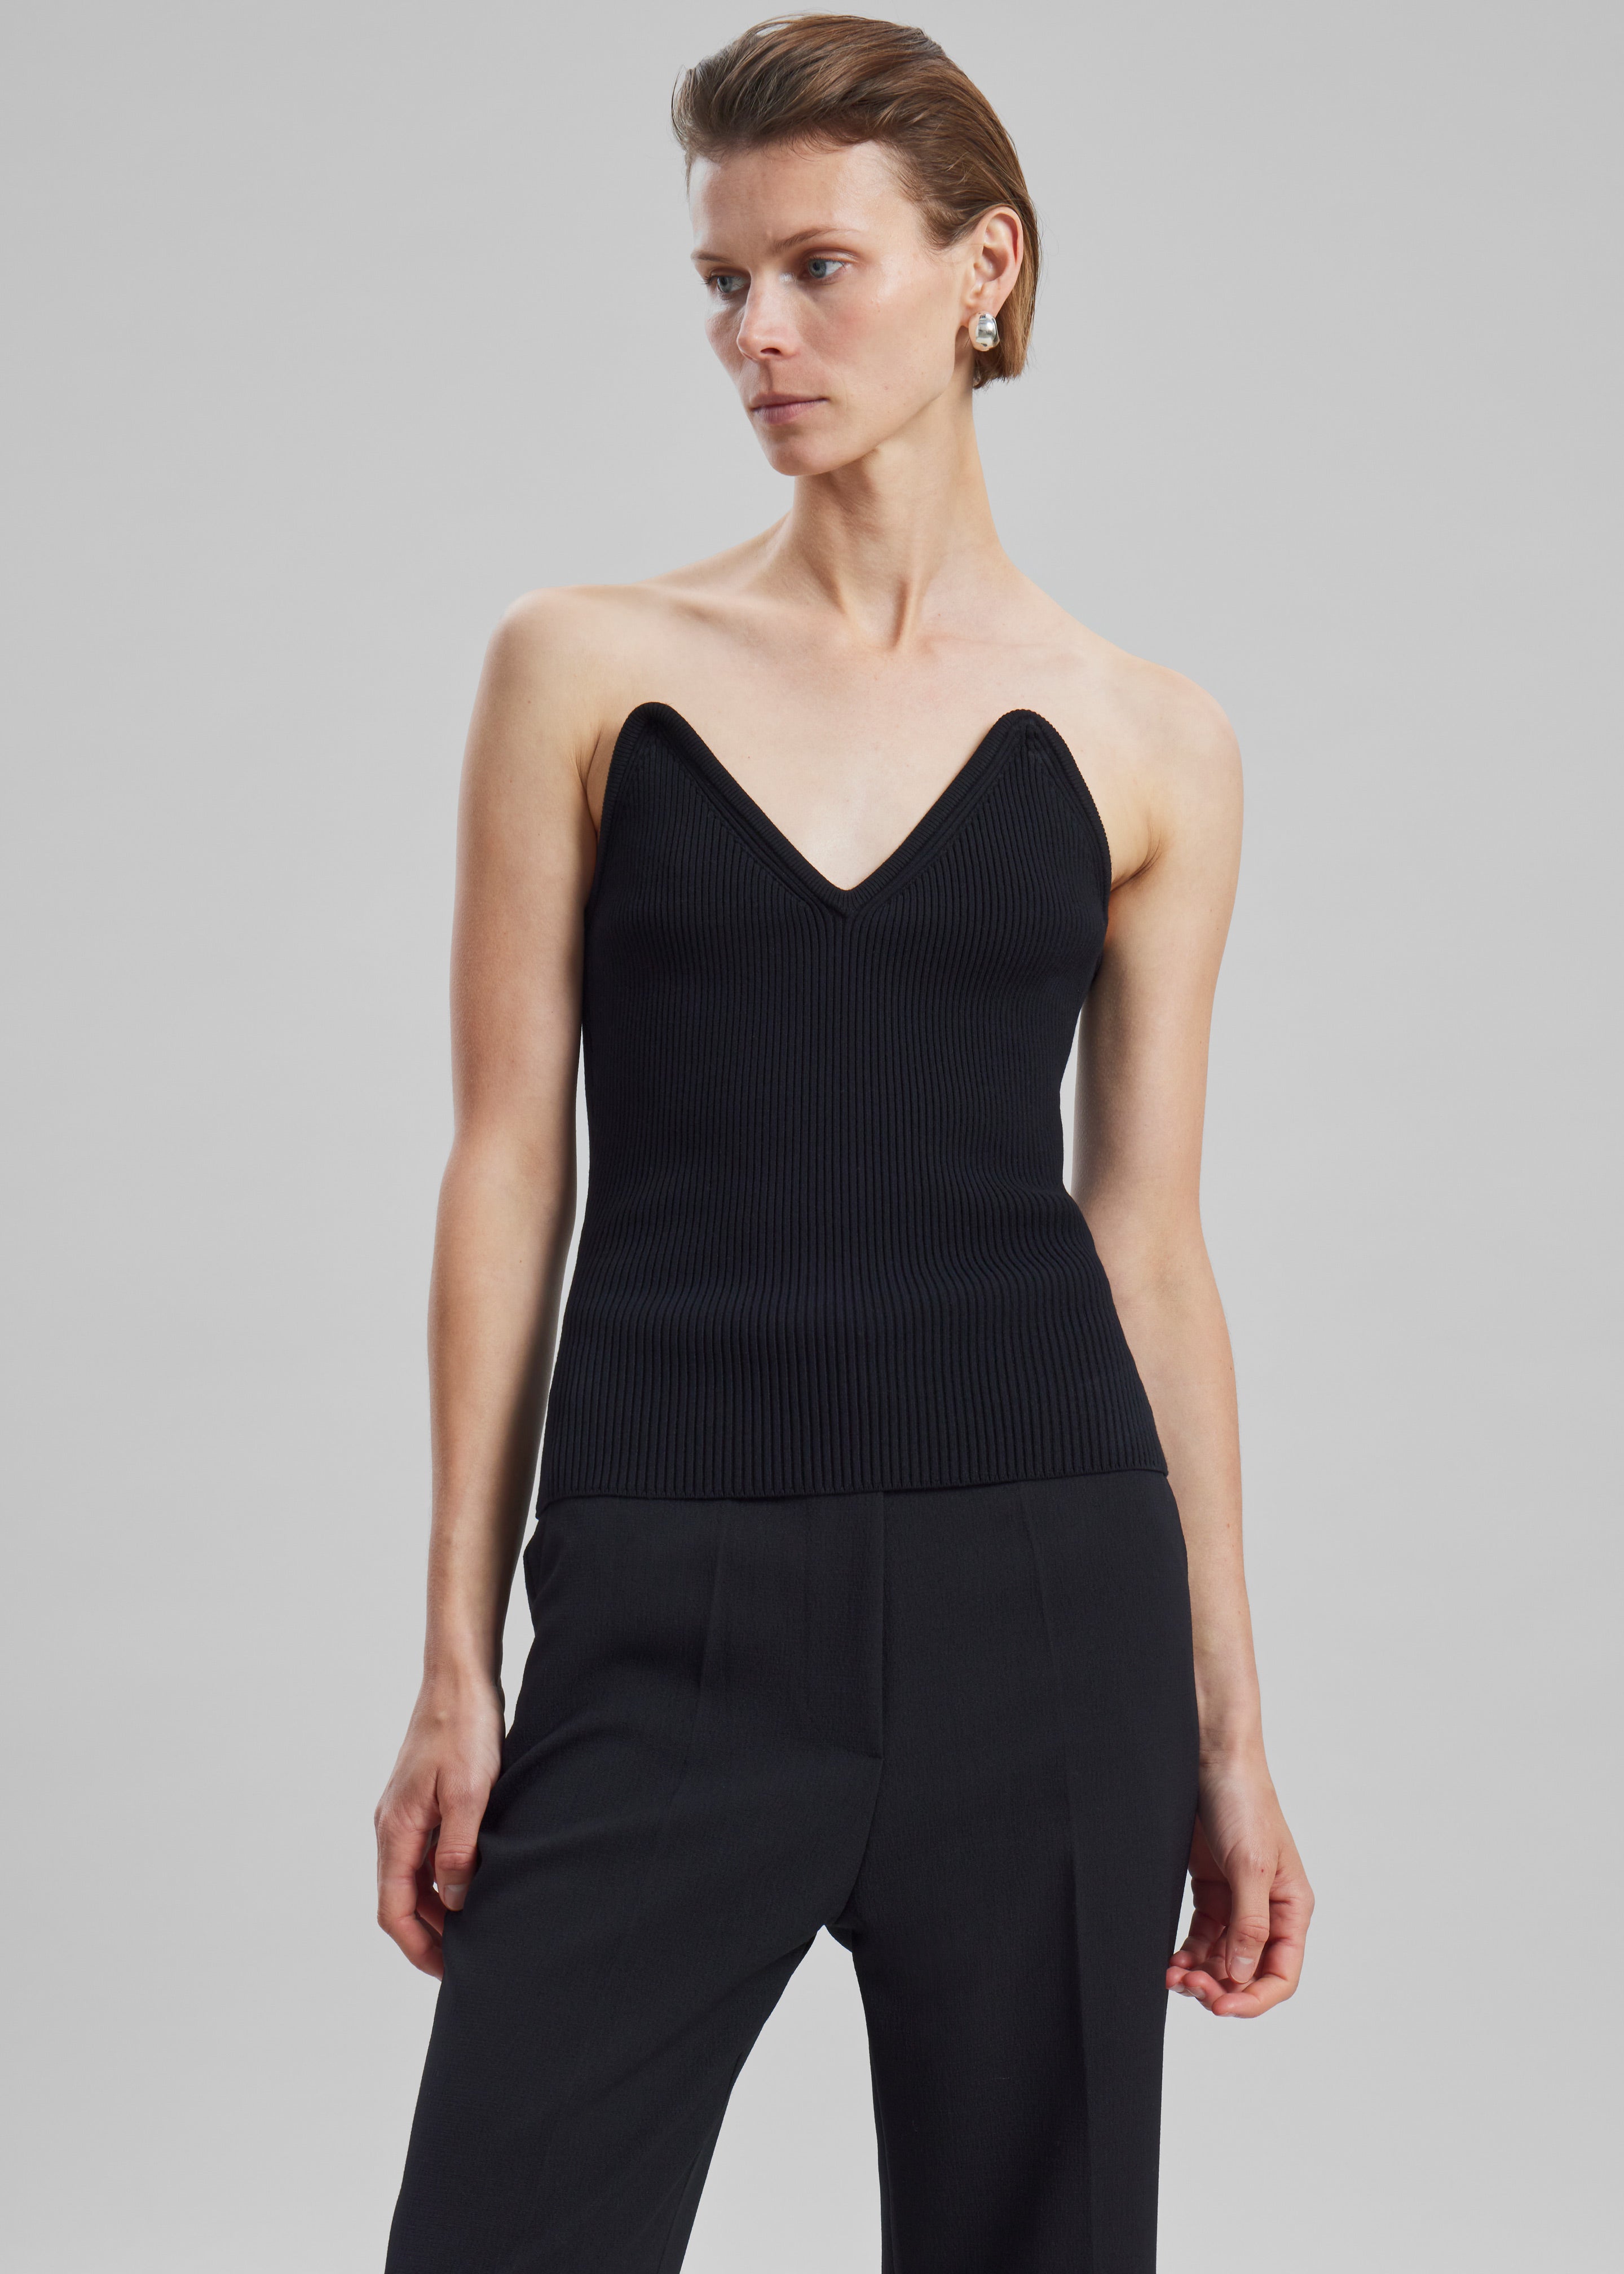 Coperni Knitted Bustier Top - Black - 1